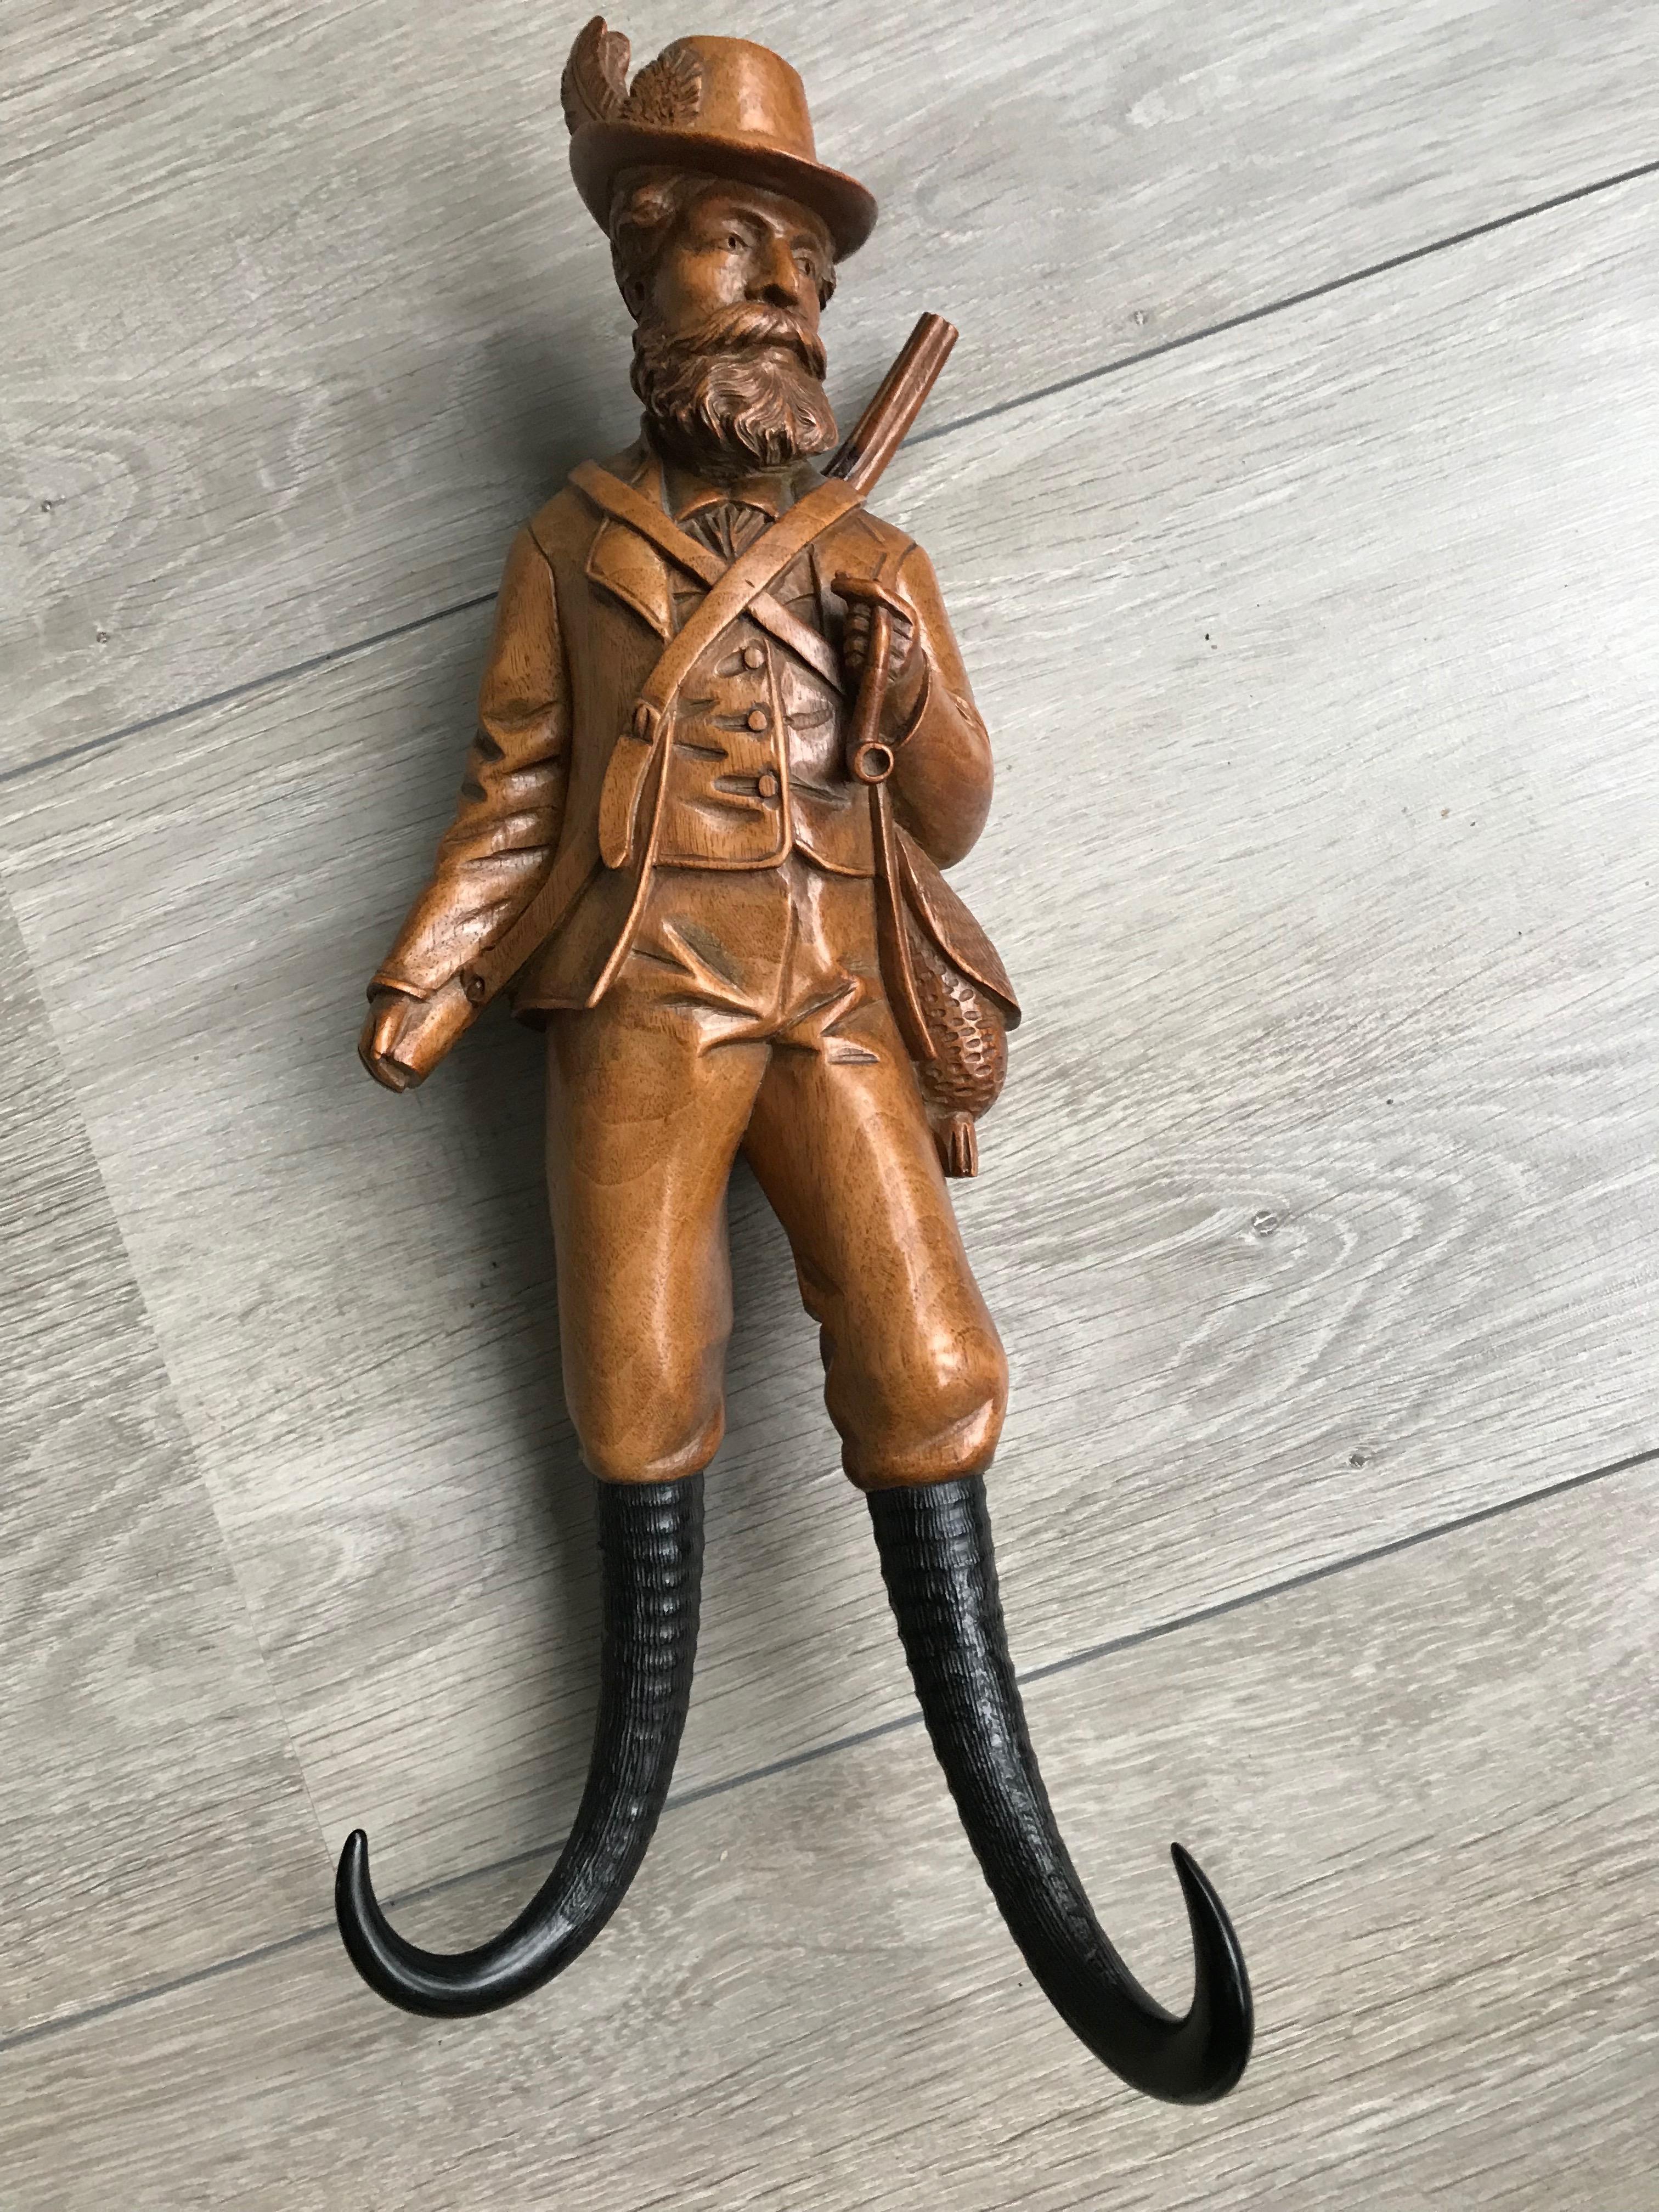 Beautifully carved Black Forest antique of museum quality and condition.

This hand-carved antique whip hook in the shape of a hunter is in excellent condition. If you are a collector of only the best quality and best condition specimen than this